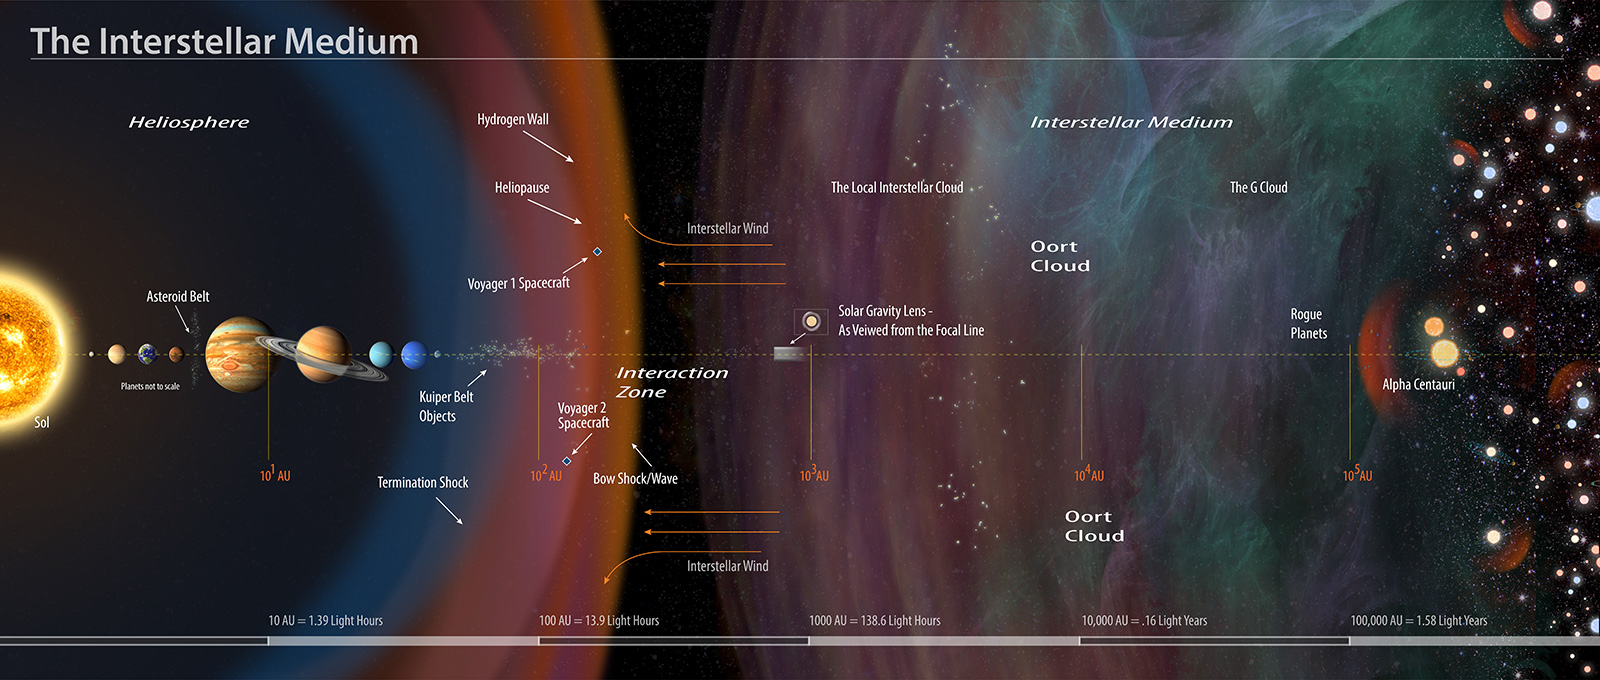 An annotated illustration of the interstellar medium. (Credits: Charles Carter/Keck Institute for Space Studies)